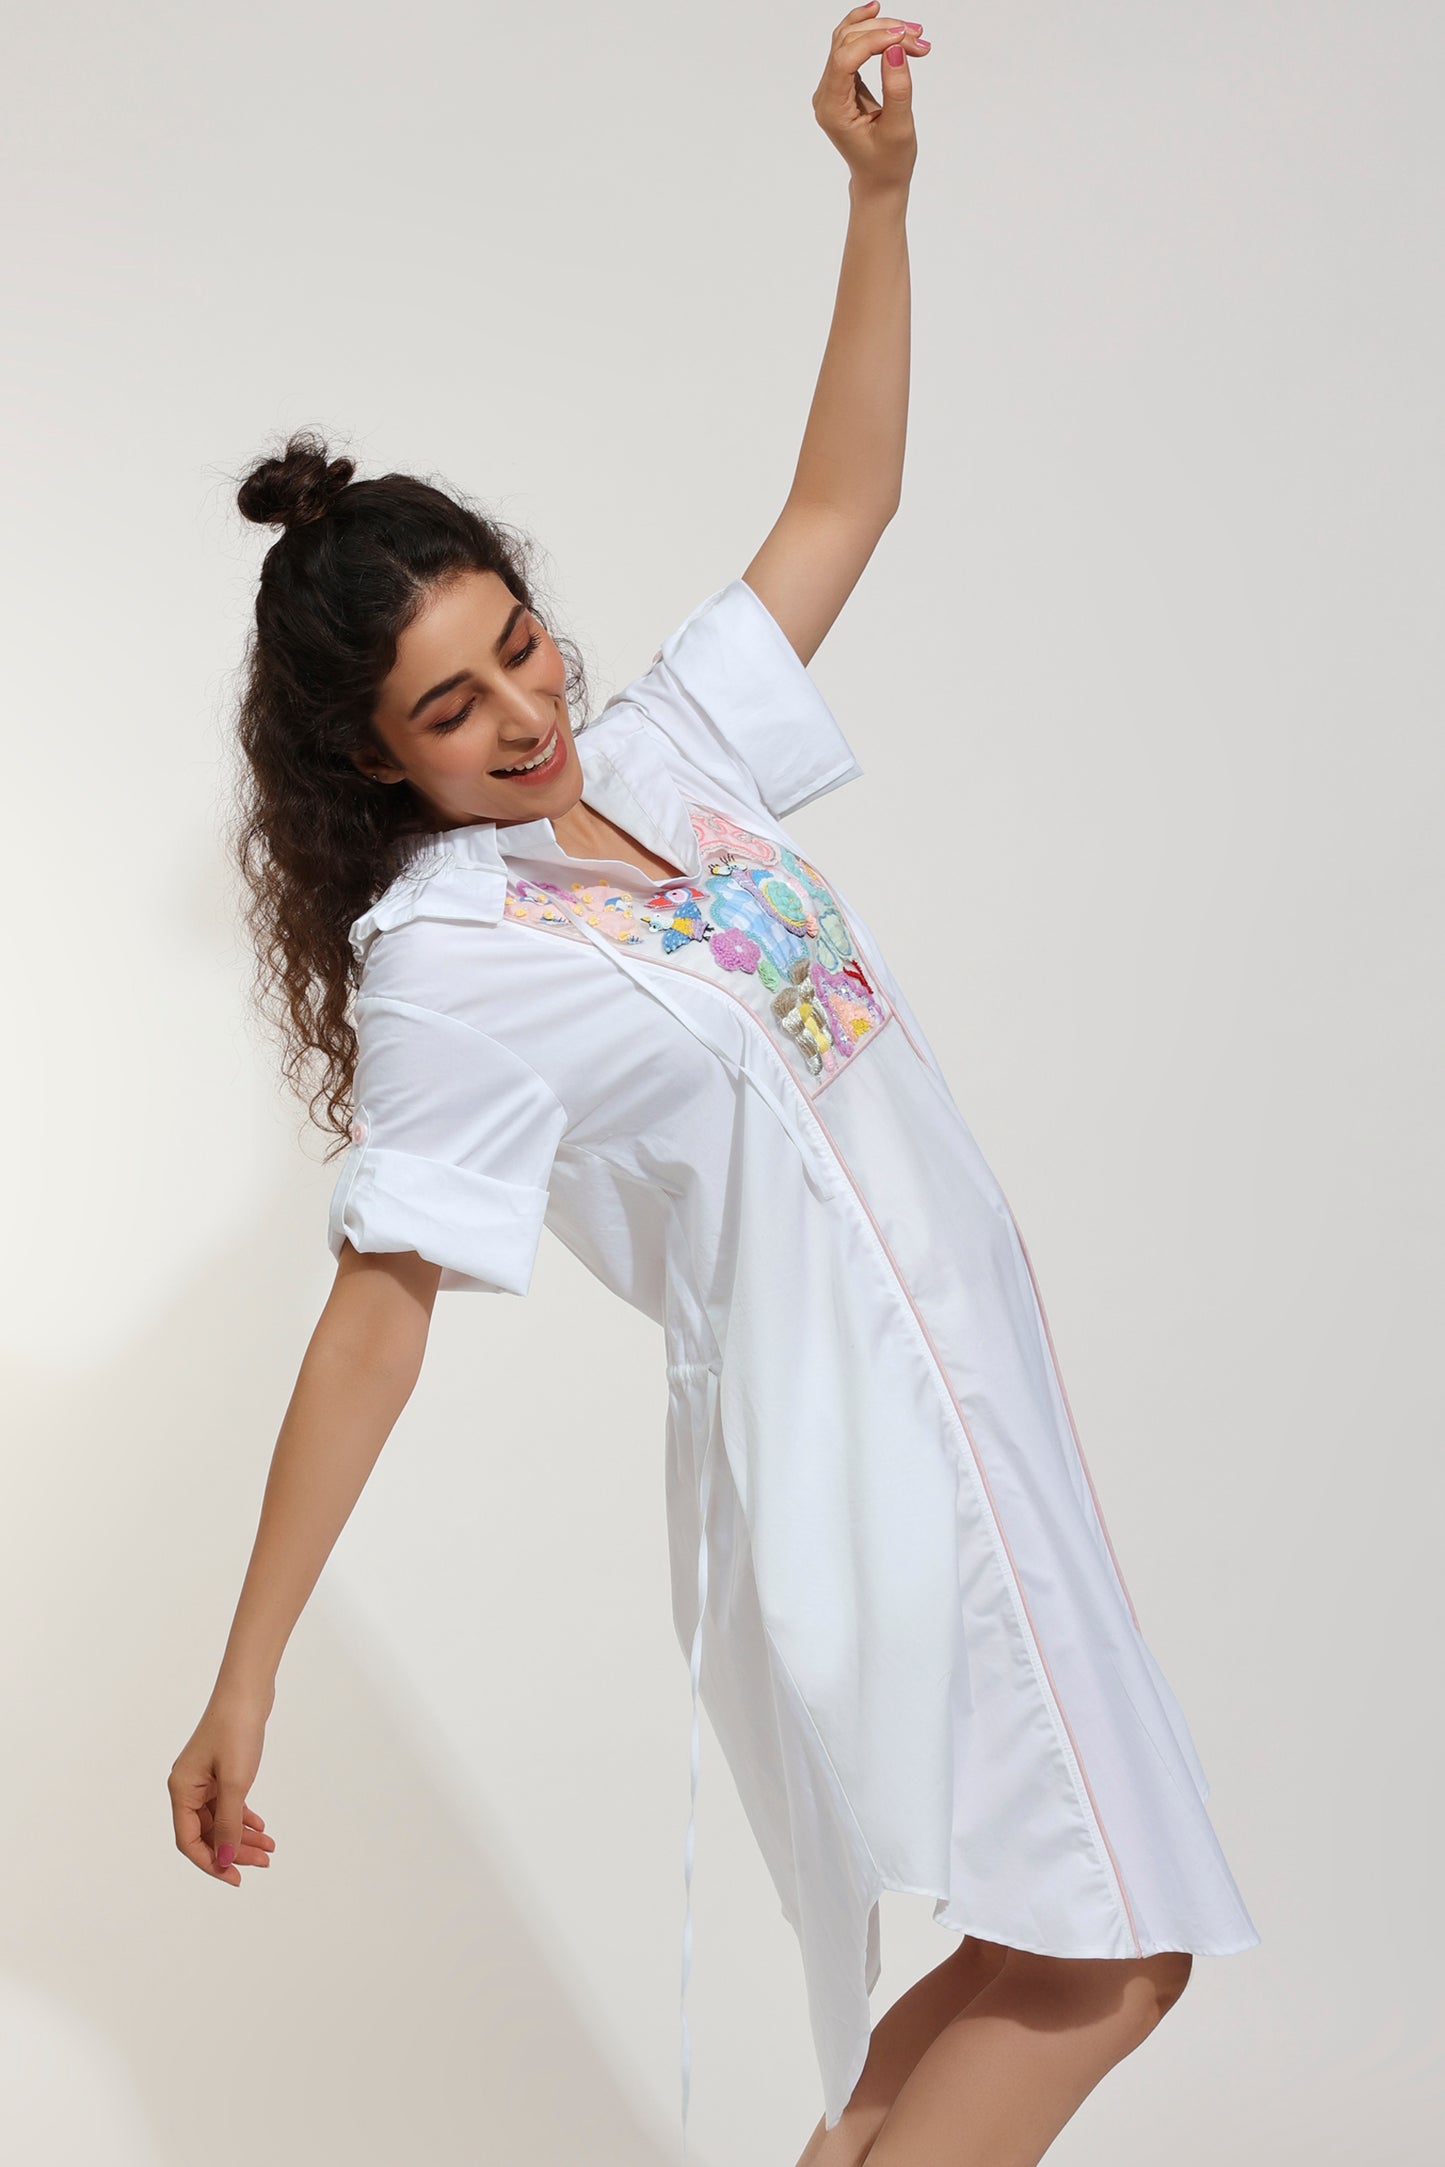 Mad Maze Embroidered White Dress (Joey & Pooh)